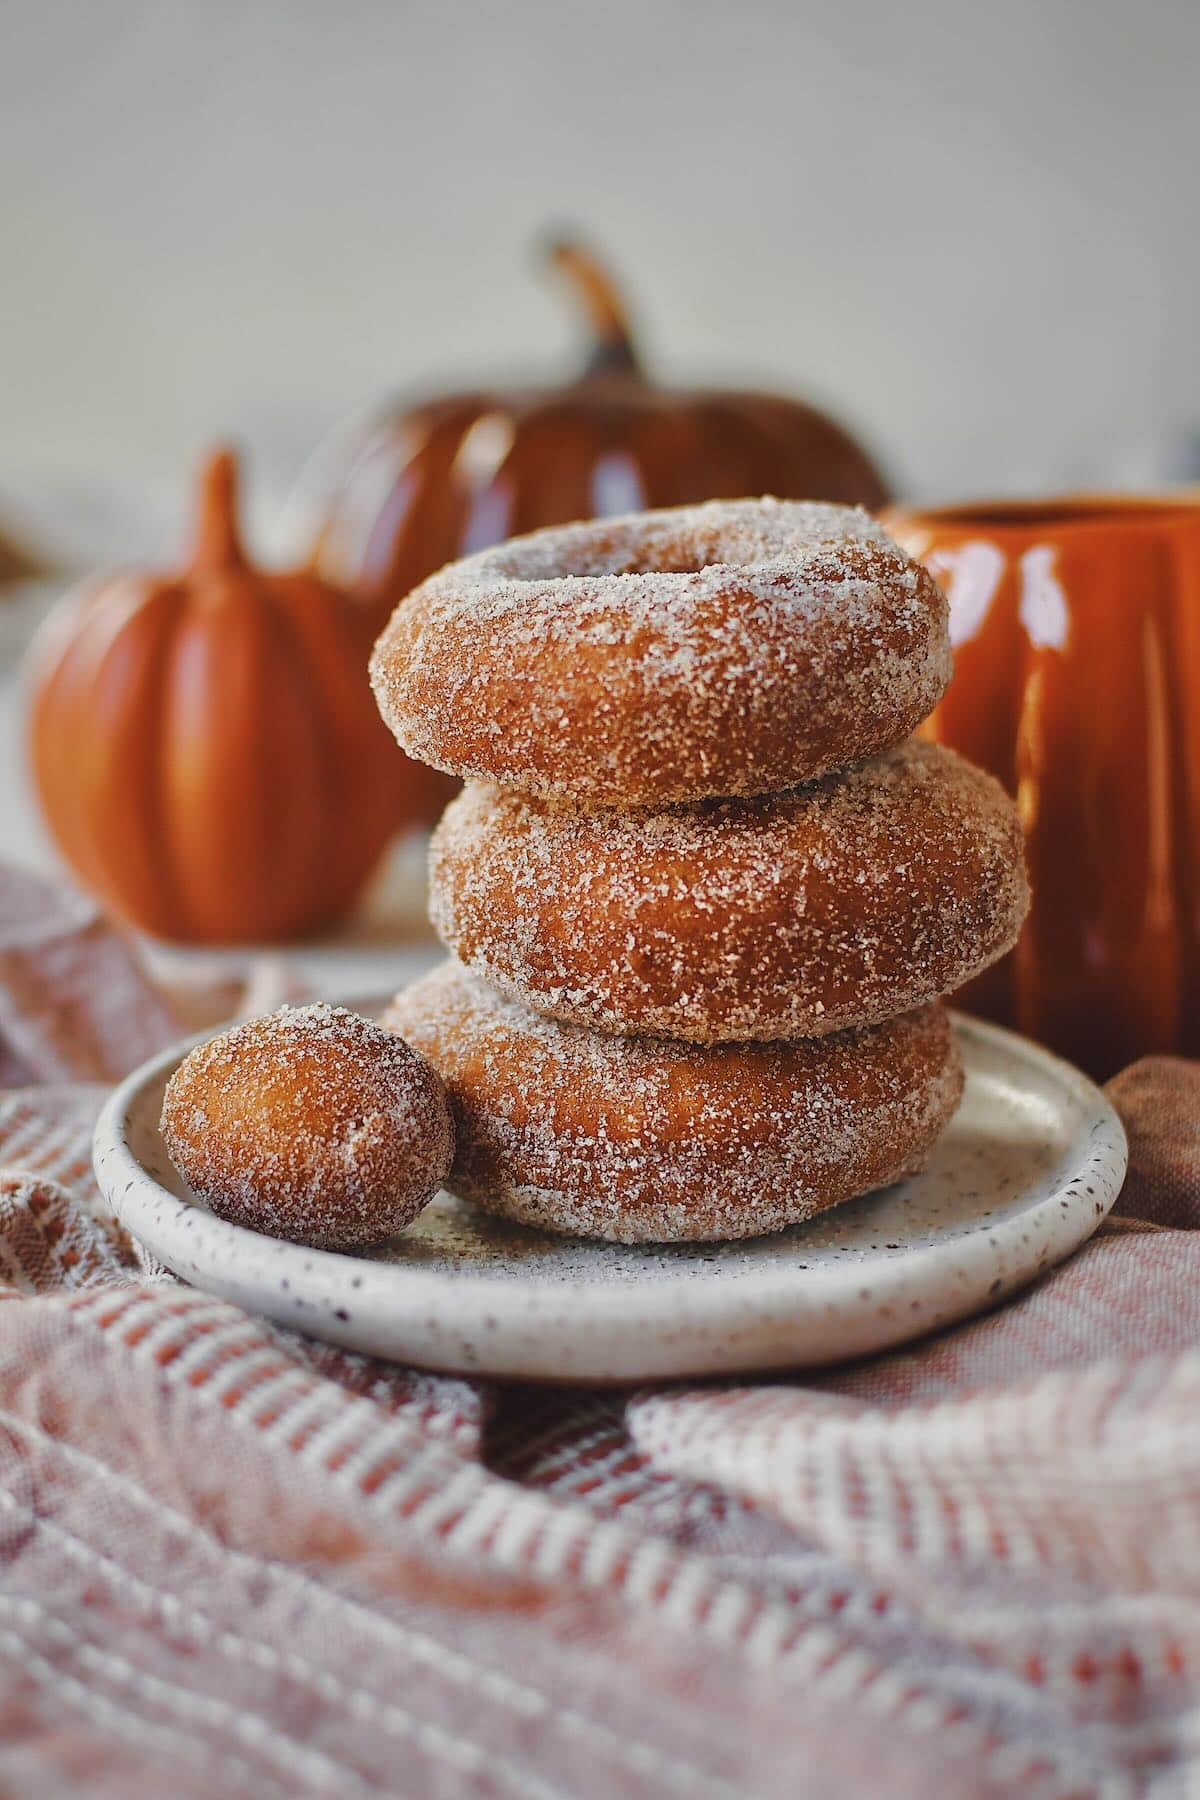 Pumpkin Donuts stacked up with a donut hole on the side, in front of a cup of coffee in a pumpkin mug.